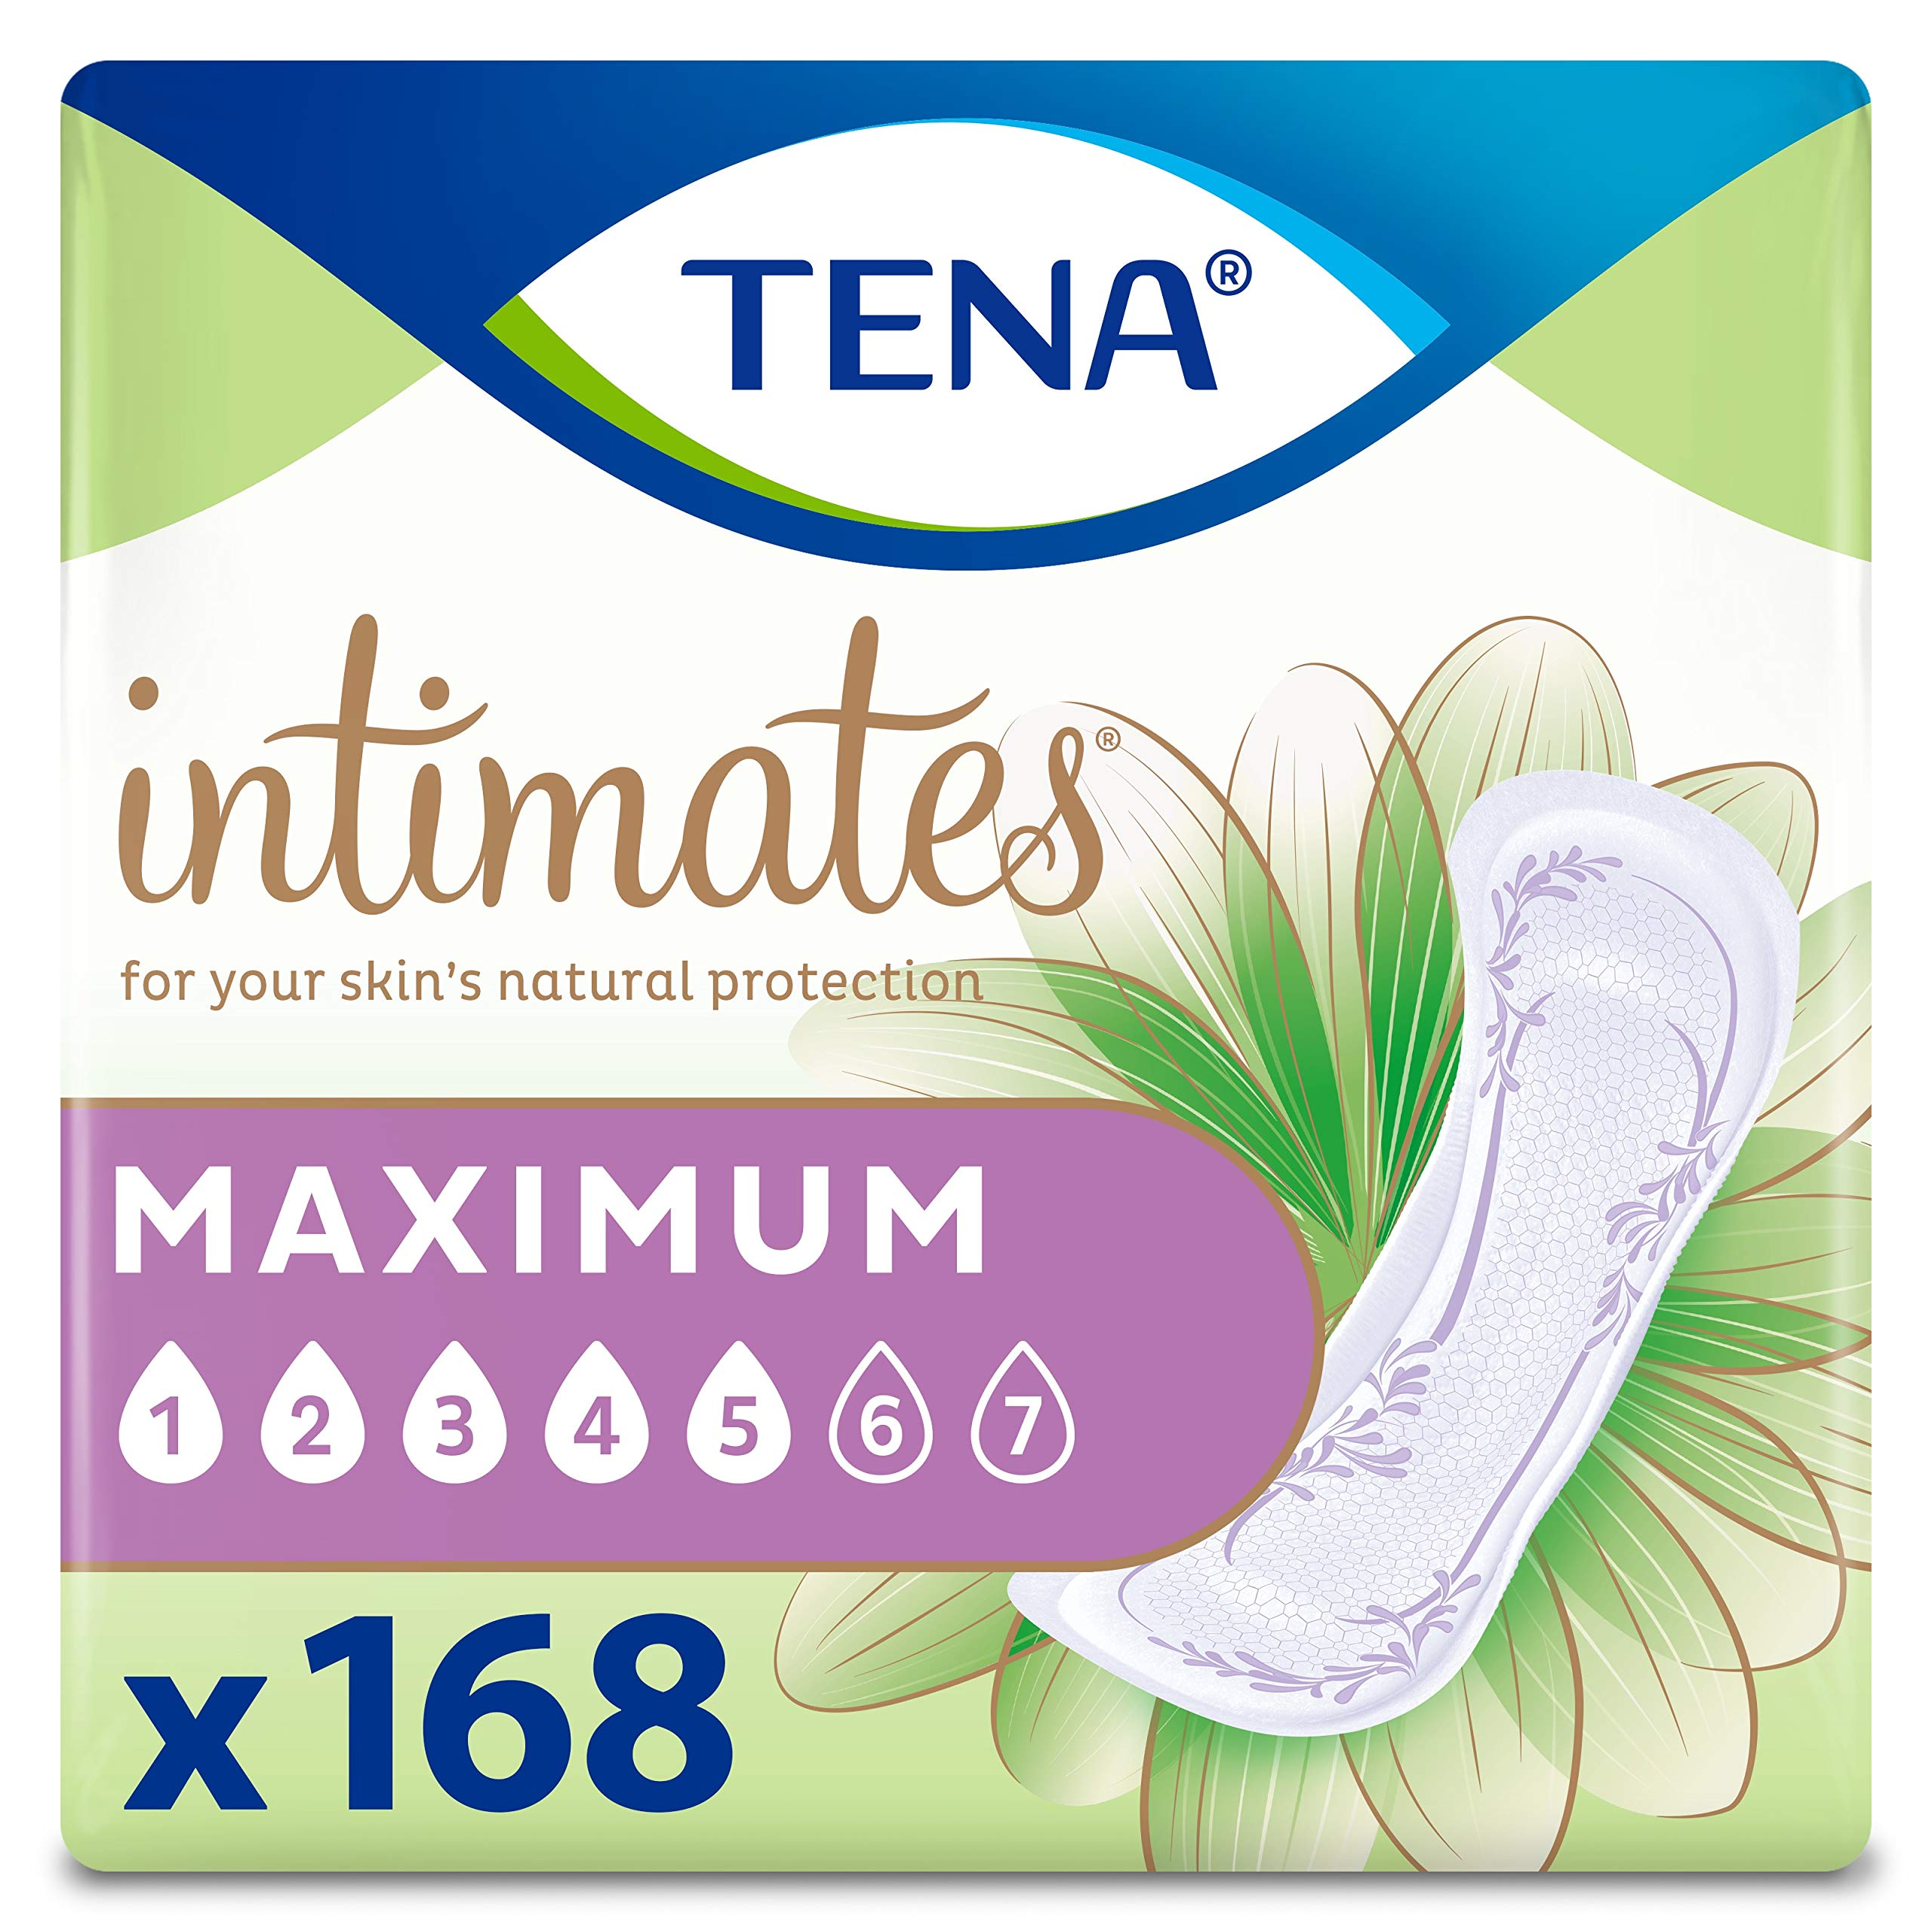 TENA Intimates Maximum Absorbency Incontinence/Bladder Control Pad for Women,  Regular Length, 168 Count (3 Packs of 56)